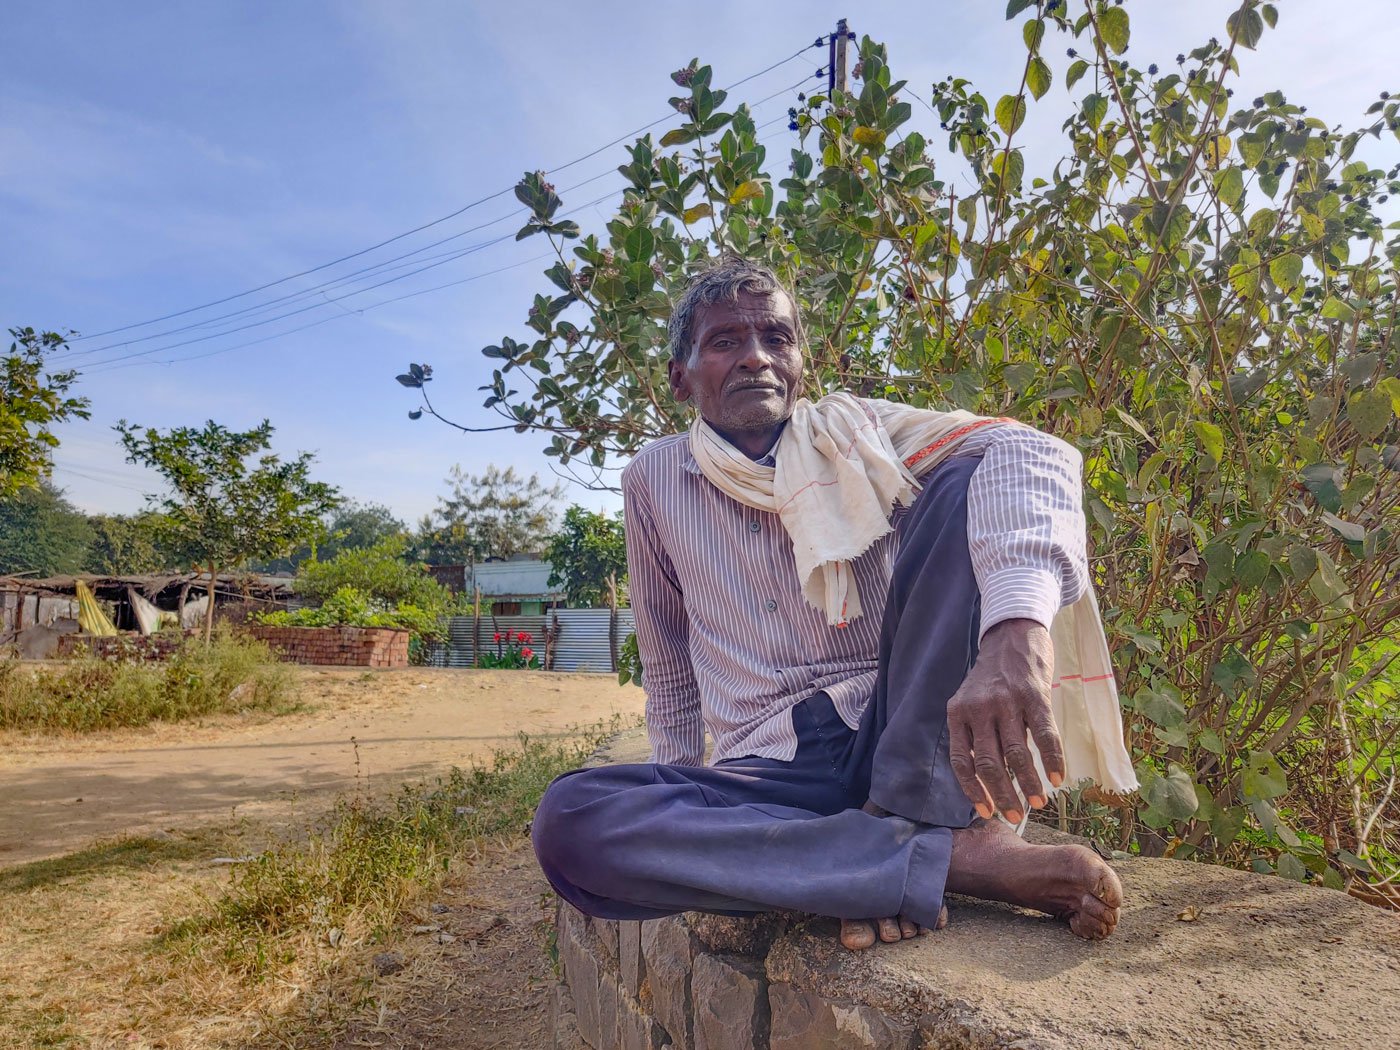 'When we pour our heart and soul into our farm and get nothing in return, how do you not get depressed?' asks Shankar. He received help when a psychologist working with TATA trust reached out to him, but it did not last long